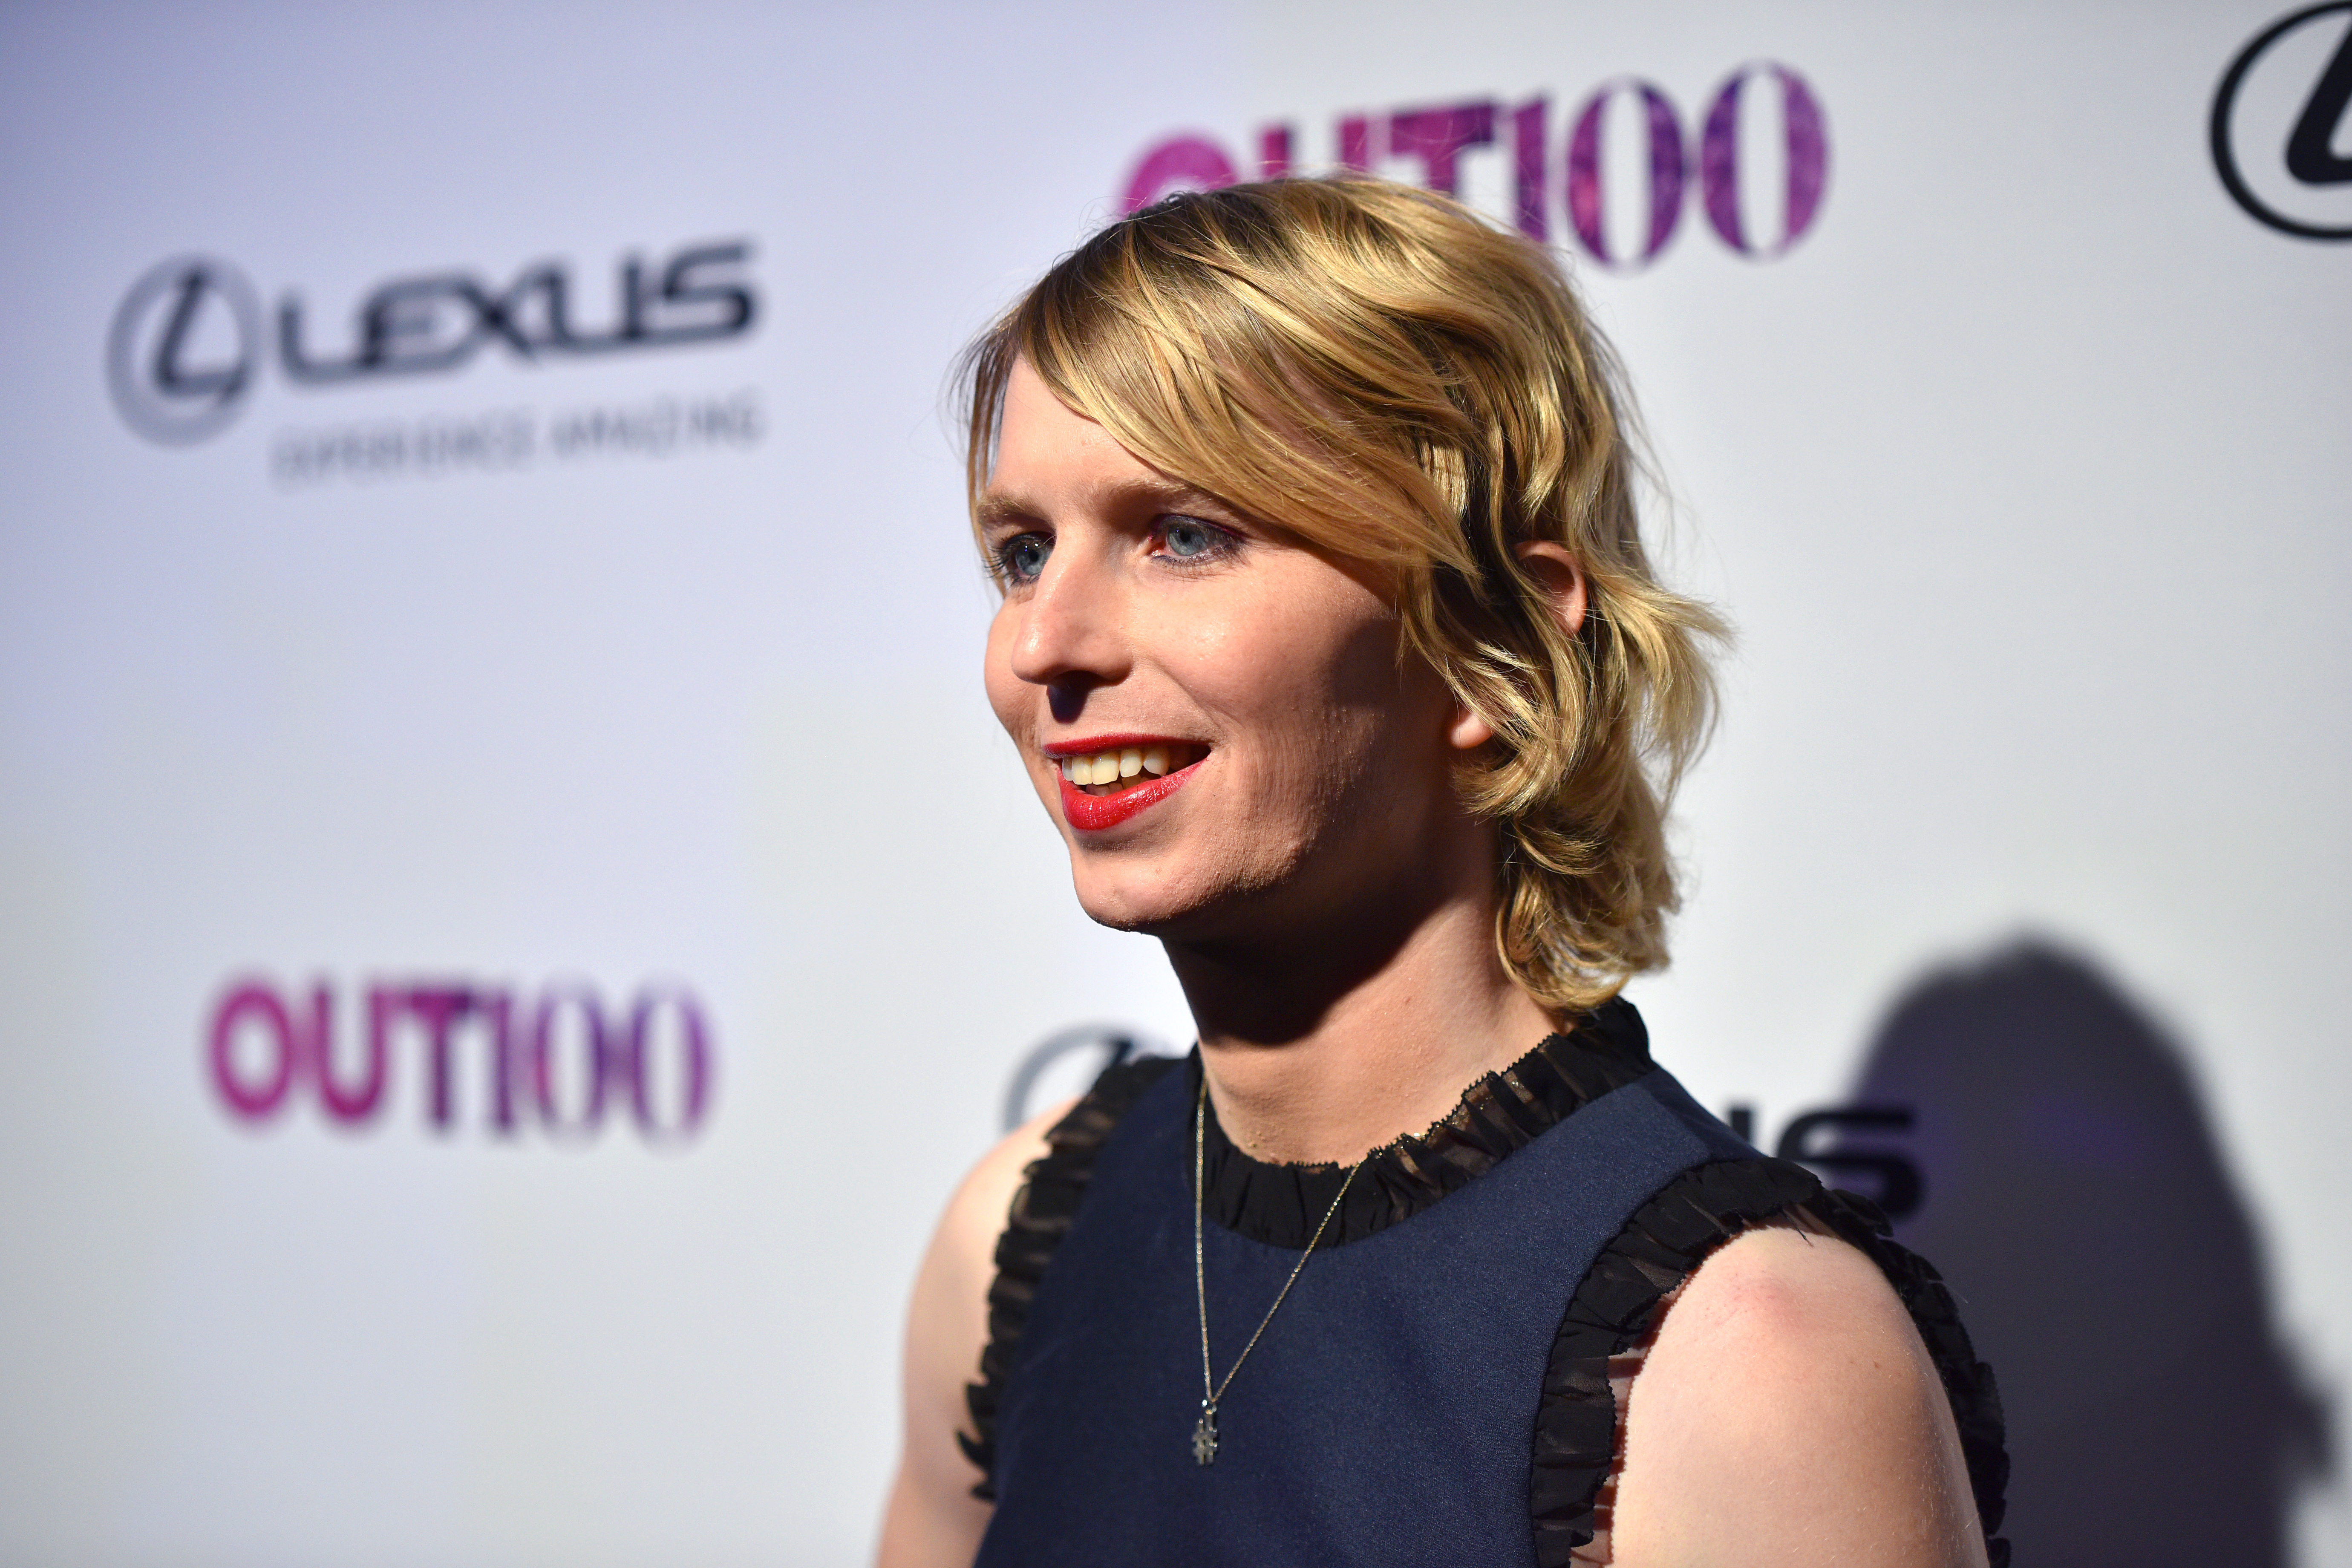 NEW YORK, NY - NOVEMBER 09: OUT100 Newsmaker of the Year Chelsea Manning attends OUT Magazine #OUT100 Event presented by Lexus at the the Altman Building on November 9, 2017 in New York City. (Photo by Bryan Bedder/Getty Images for OUT Magazine)